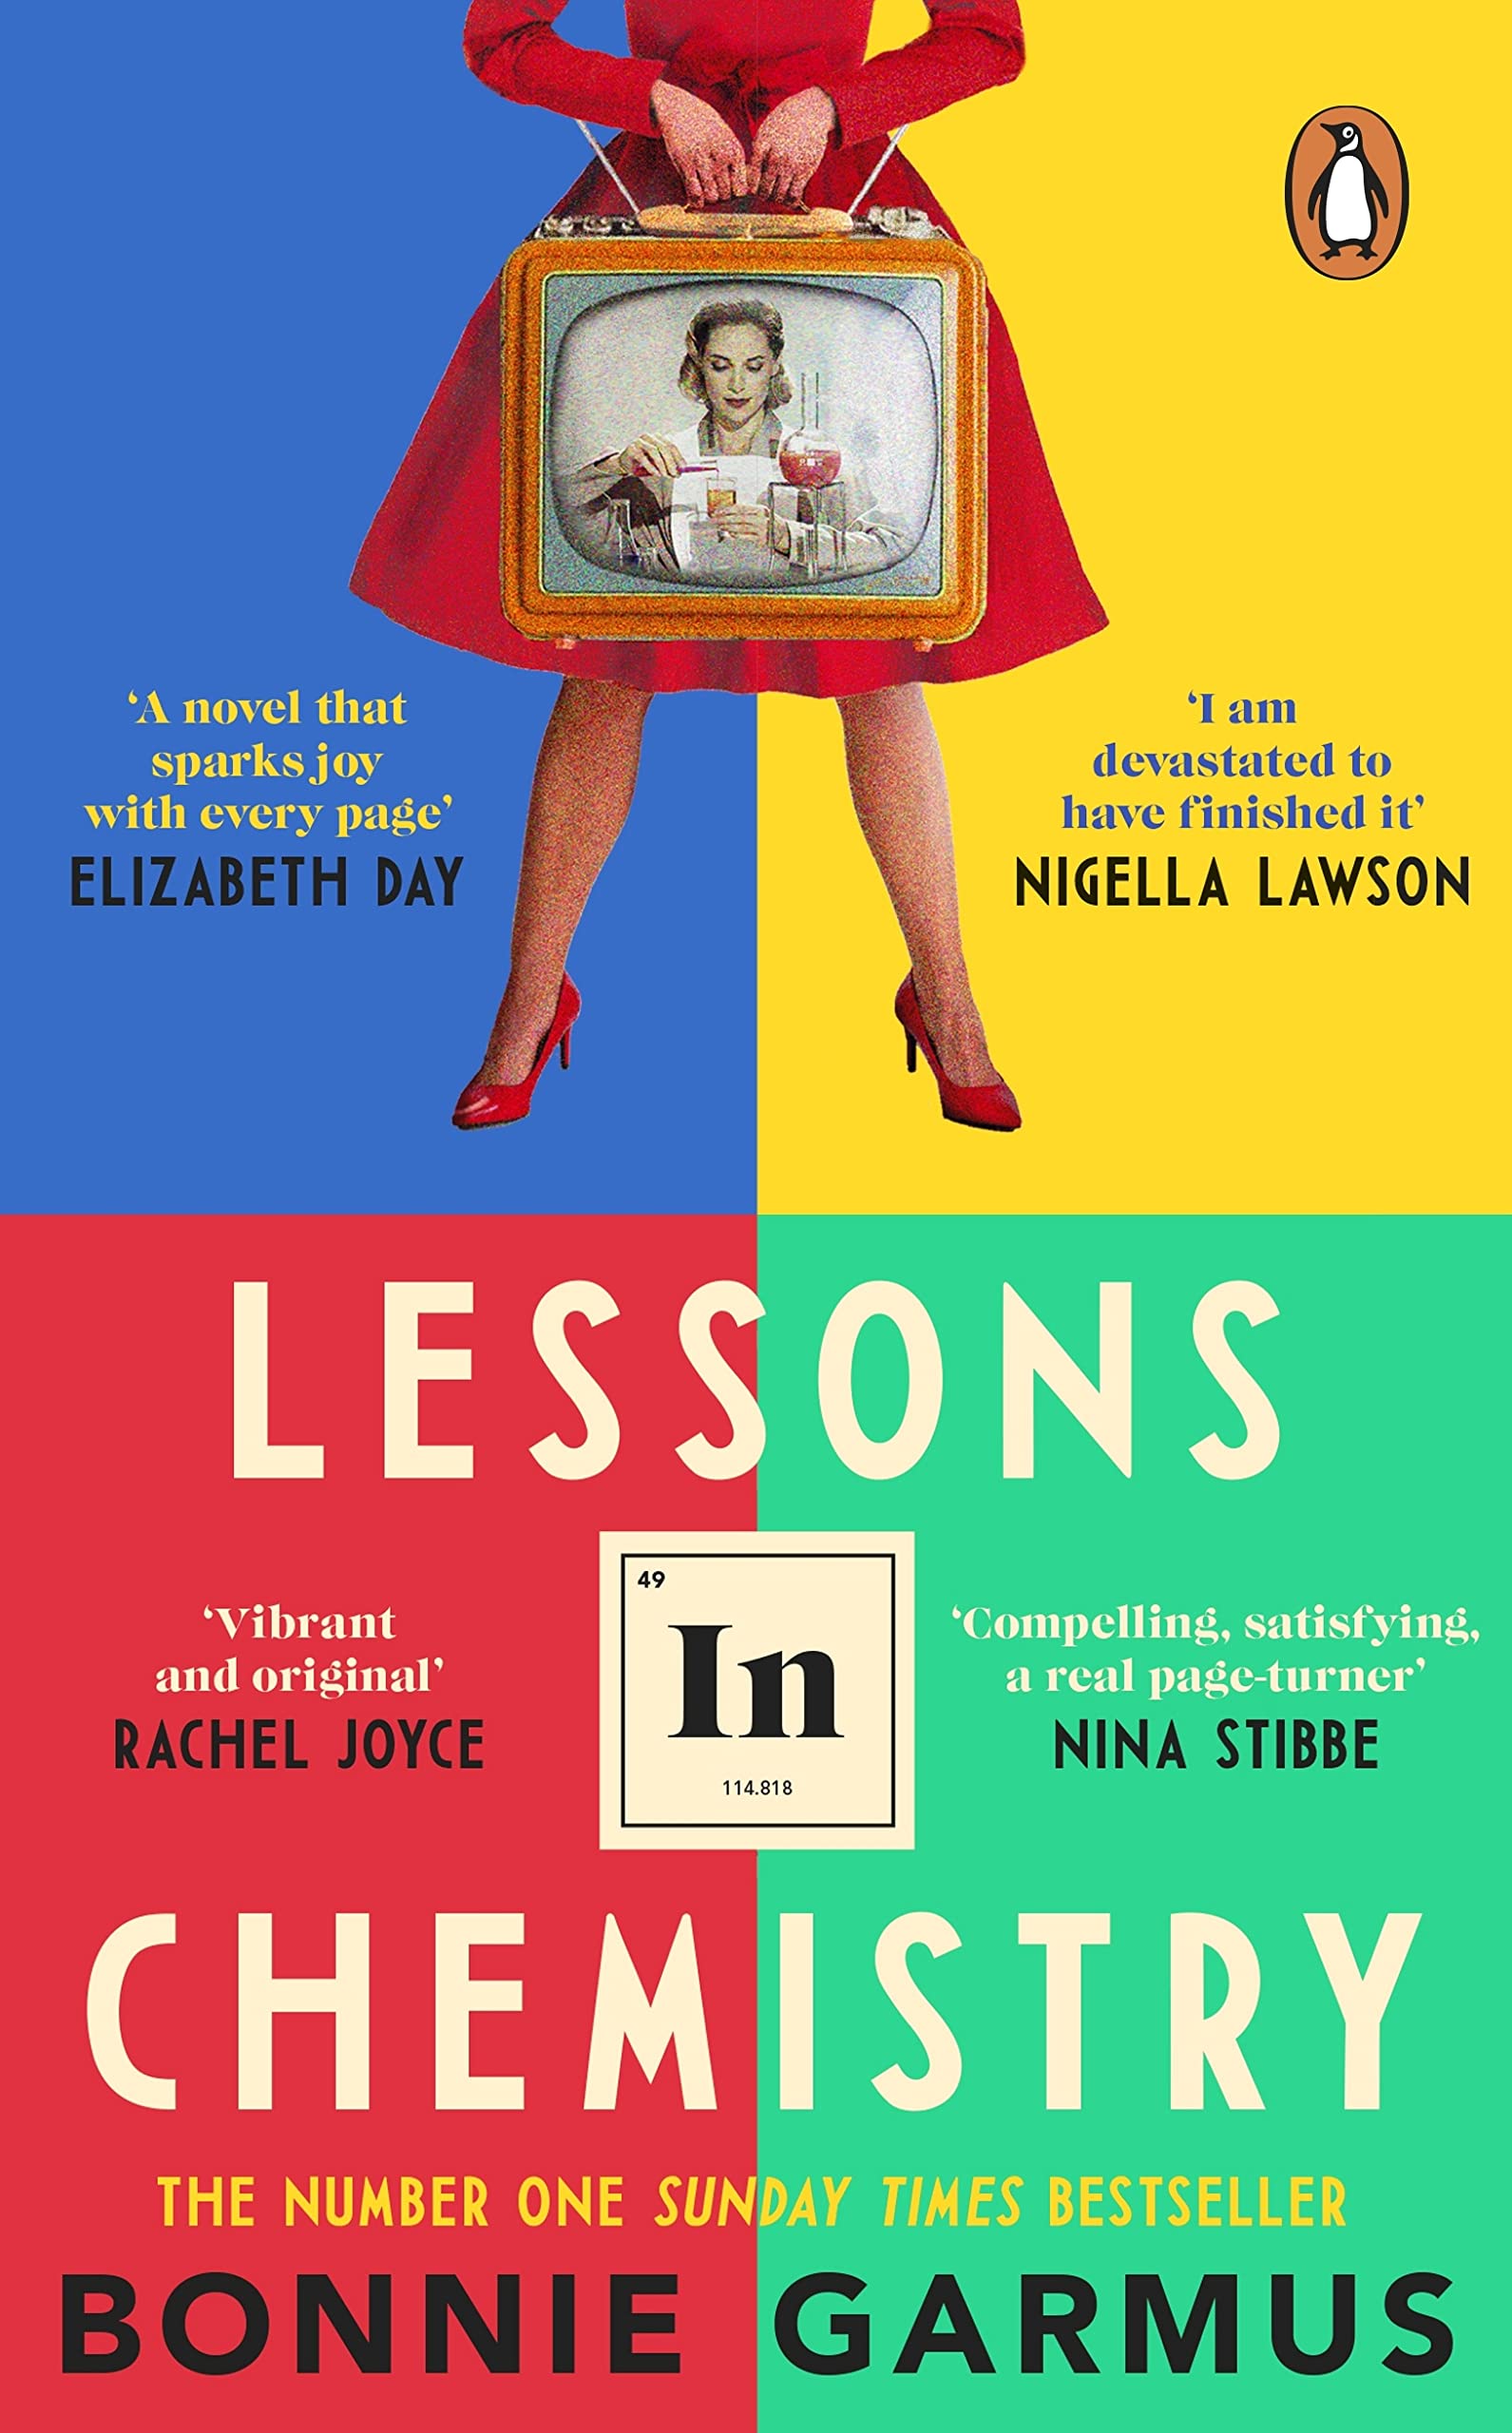 Lessons in Chemistry : The No. 1 Sunday Times bestseller and BBC Between the Covers Book Club pick (The No. 1 Sunday Times bestseller and BBC Between the Covers Book Club pick)의 표지 이미지